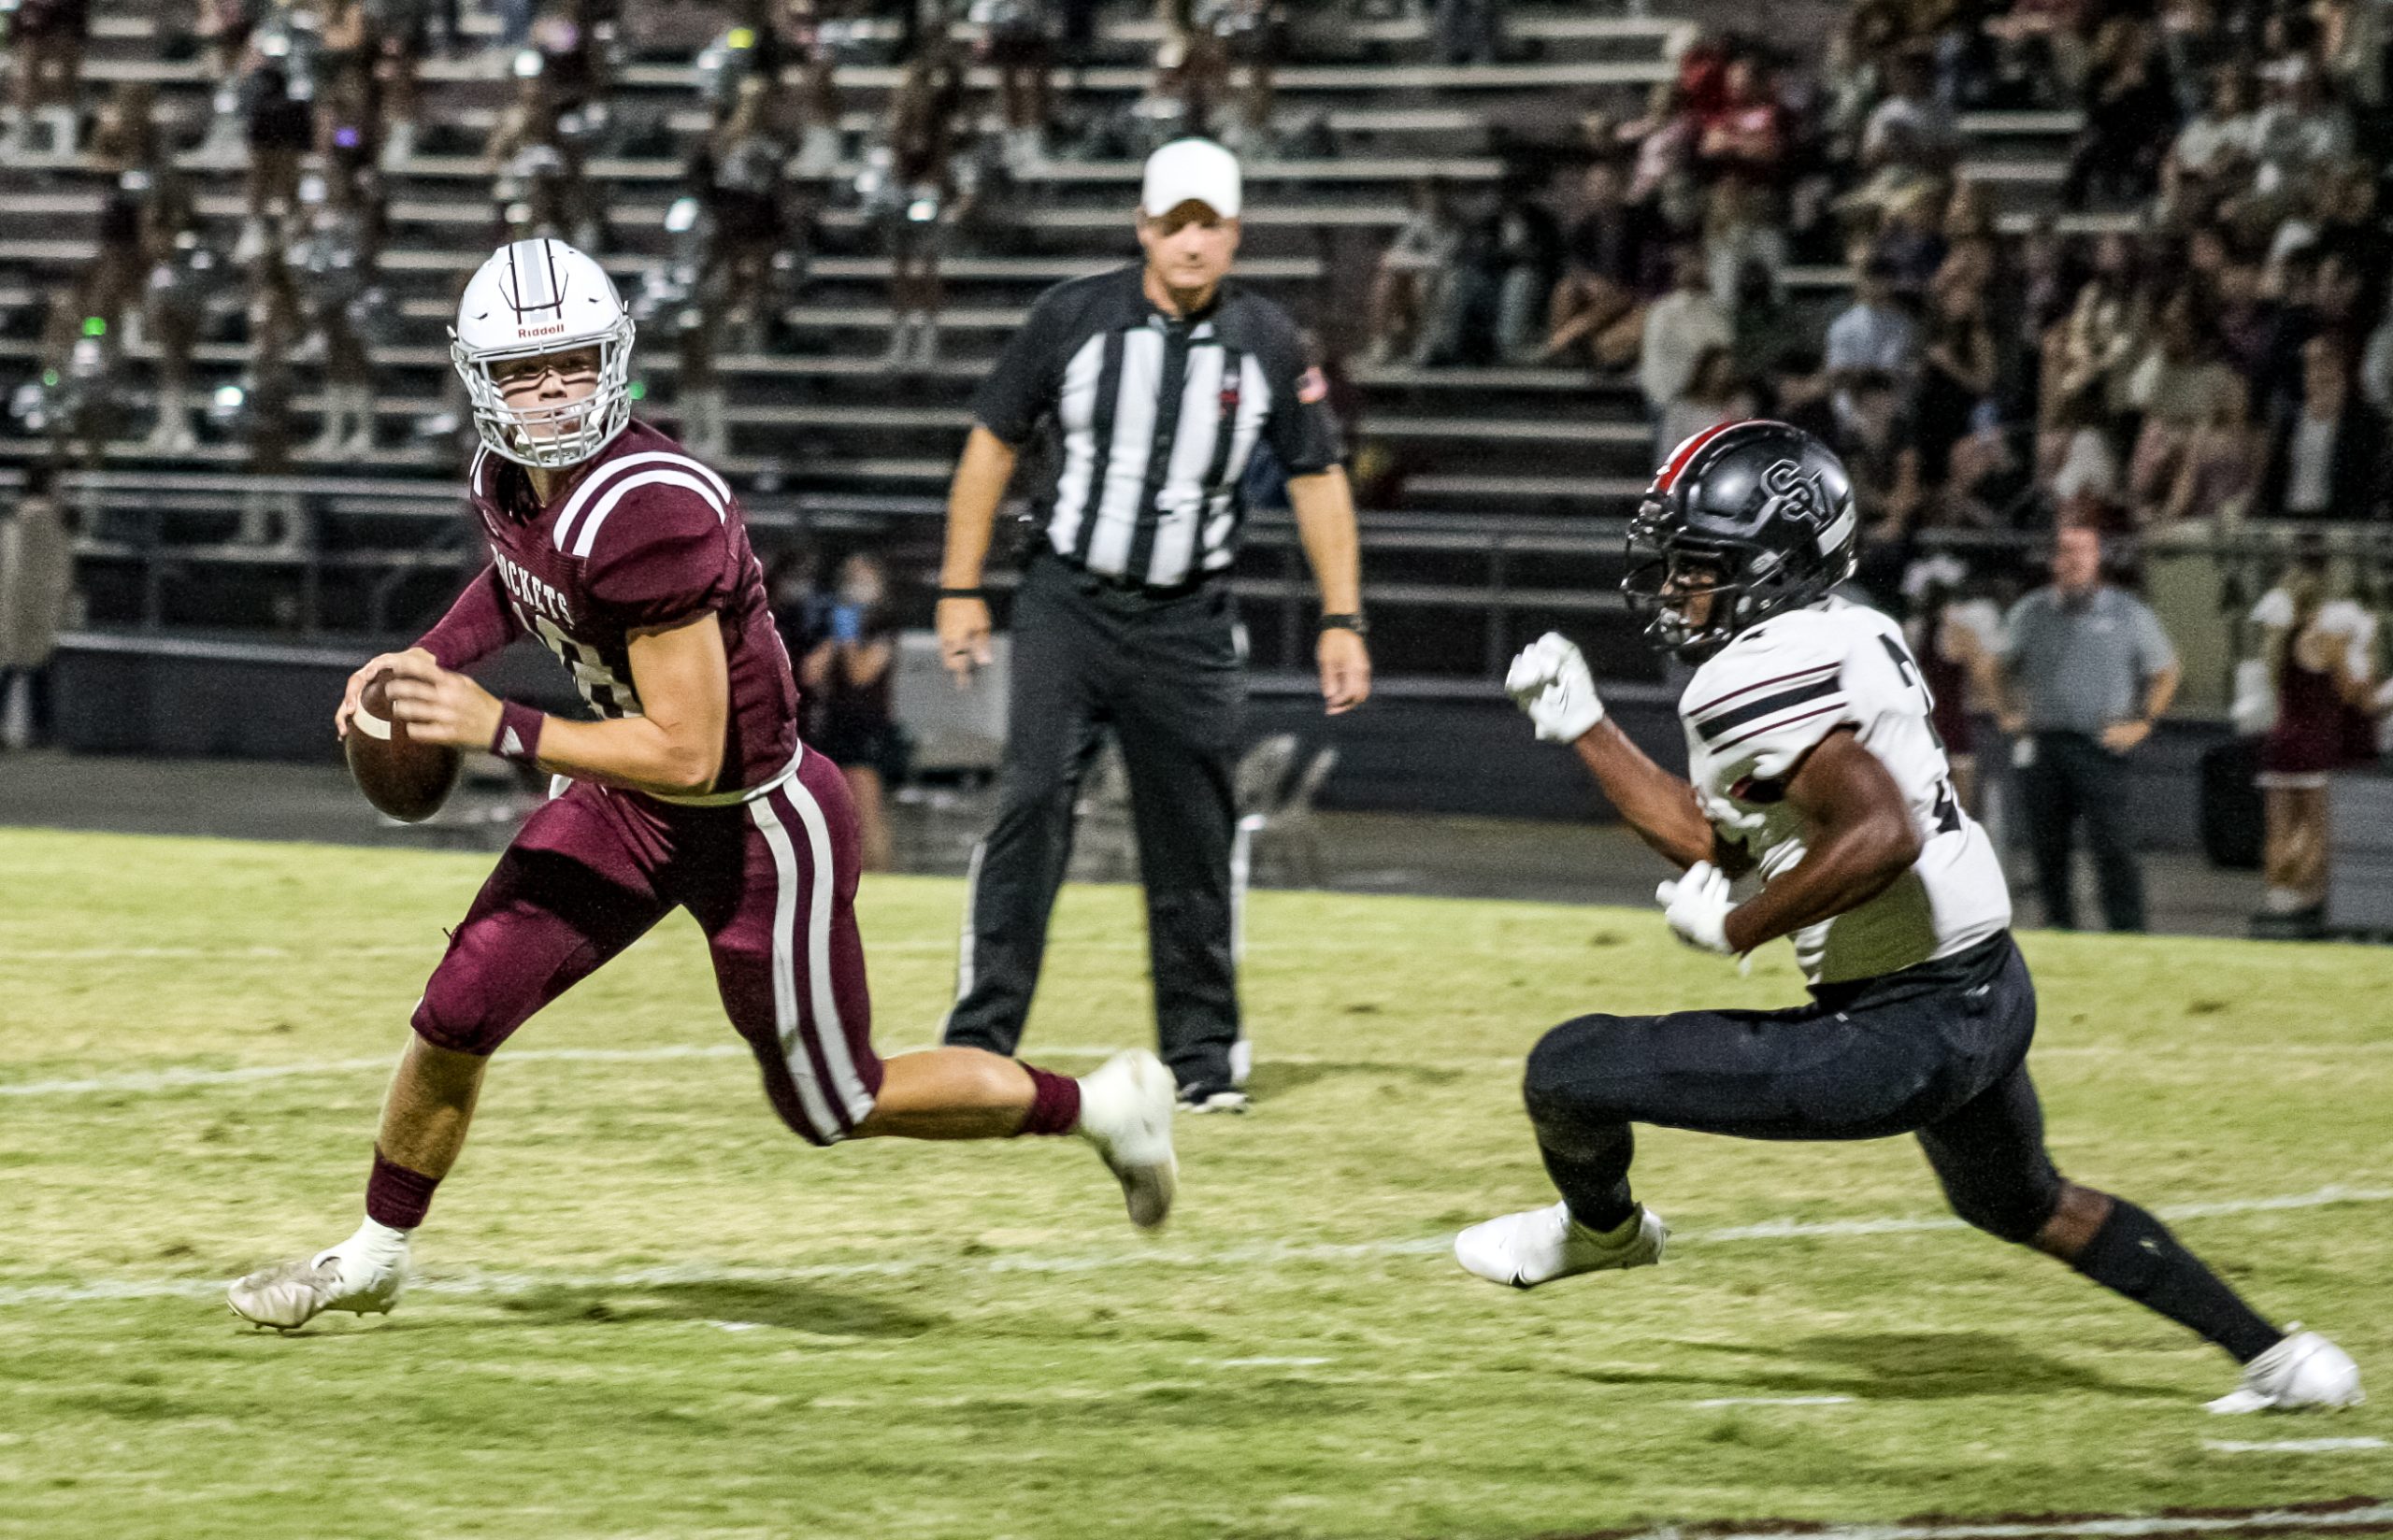 Gardendale takes down Shades Valley 41-26